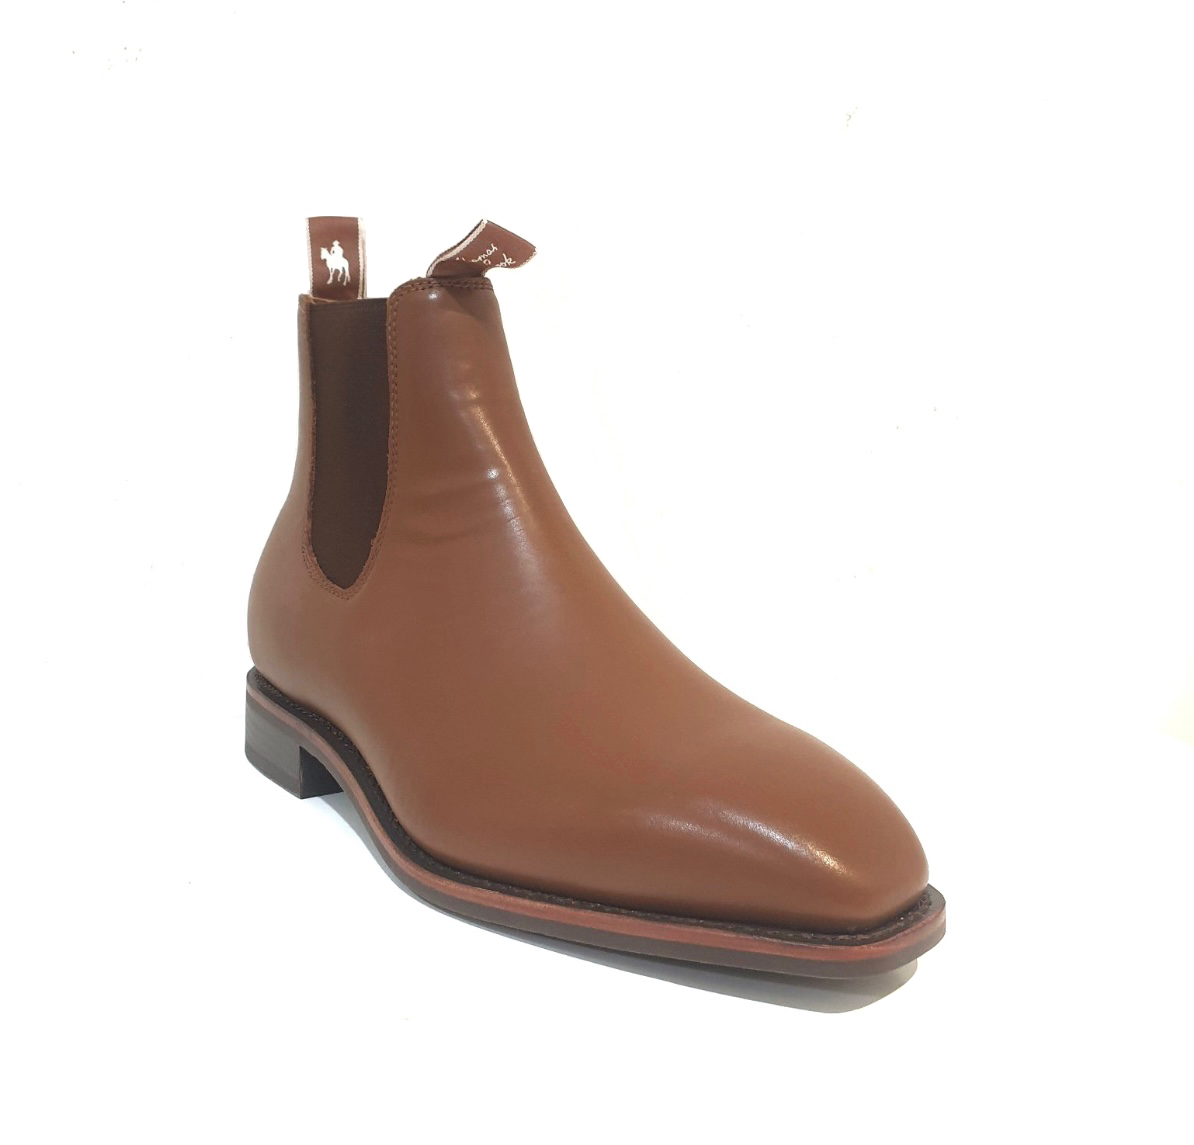 Thomas Cook Trentham Light Tan One Piece Rubber Sole Chelsea Dress Boot